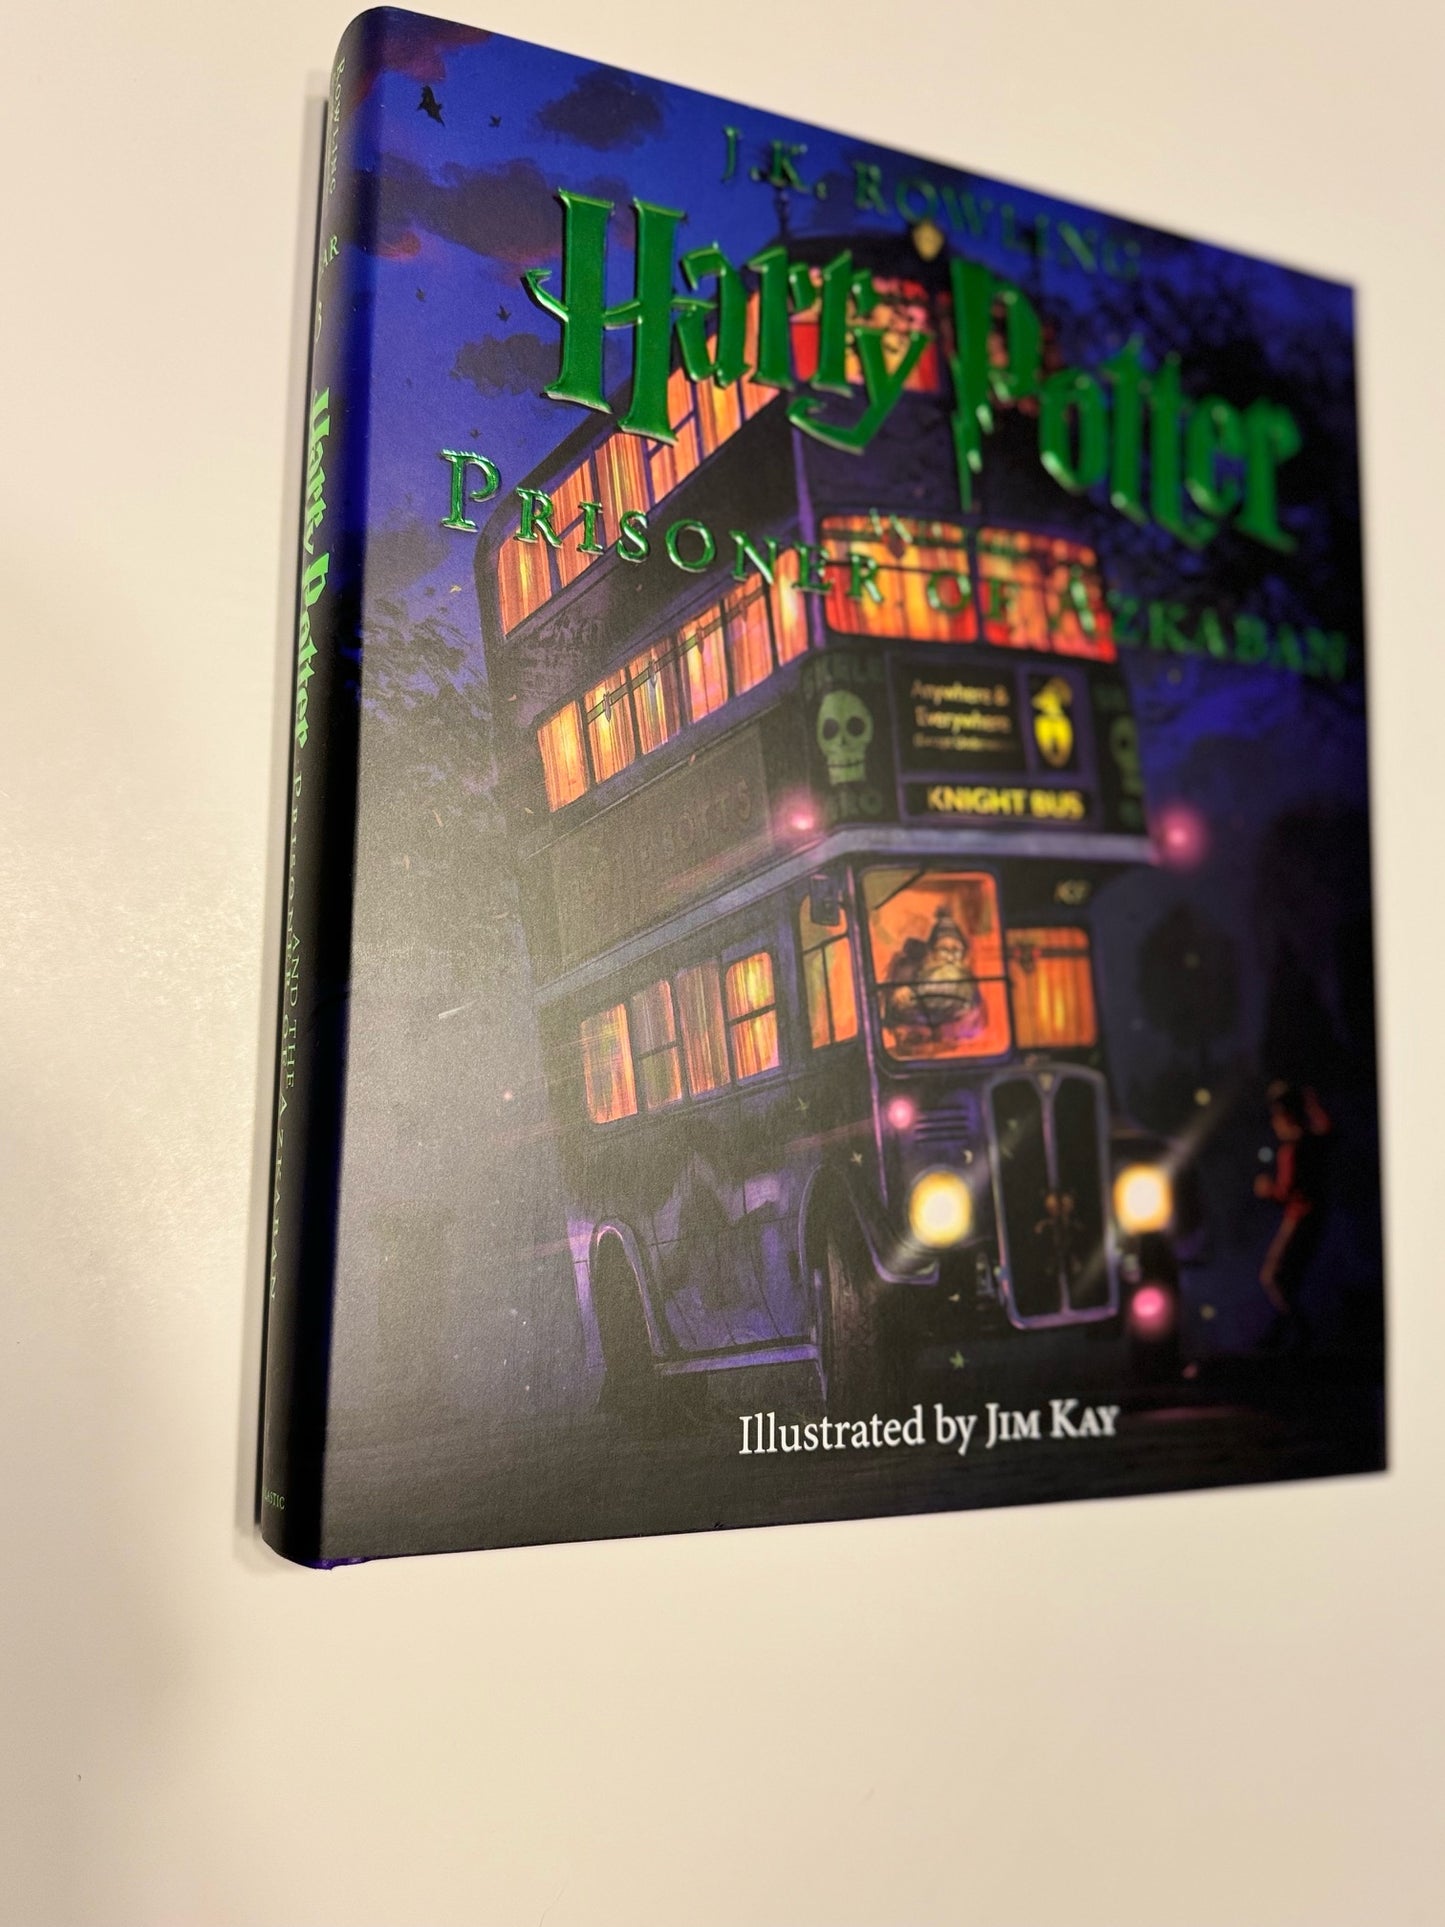 Harry Potter and the Prisoner of Azkaban: The Illustrated Edition (Hardcover) Huge Book